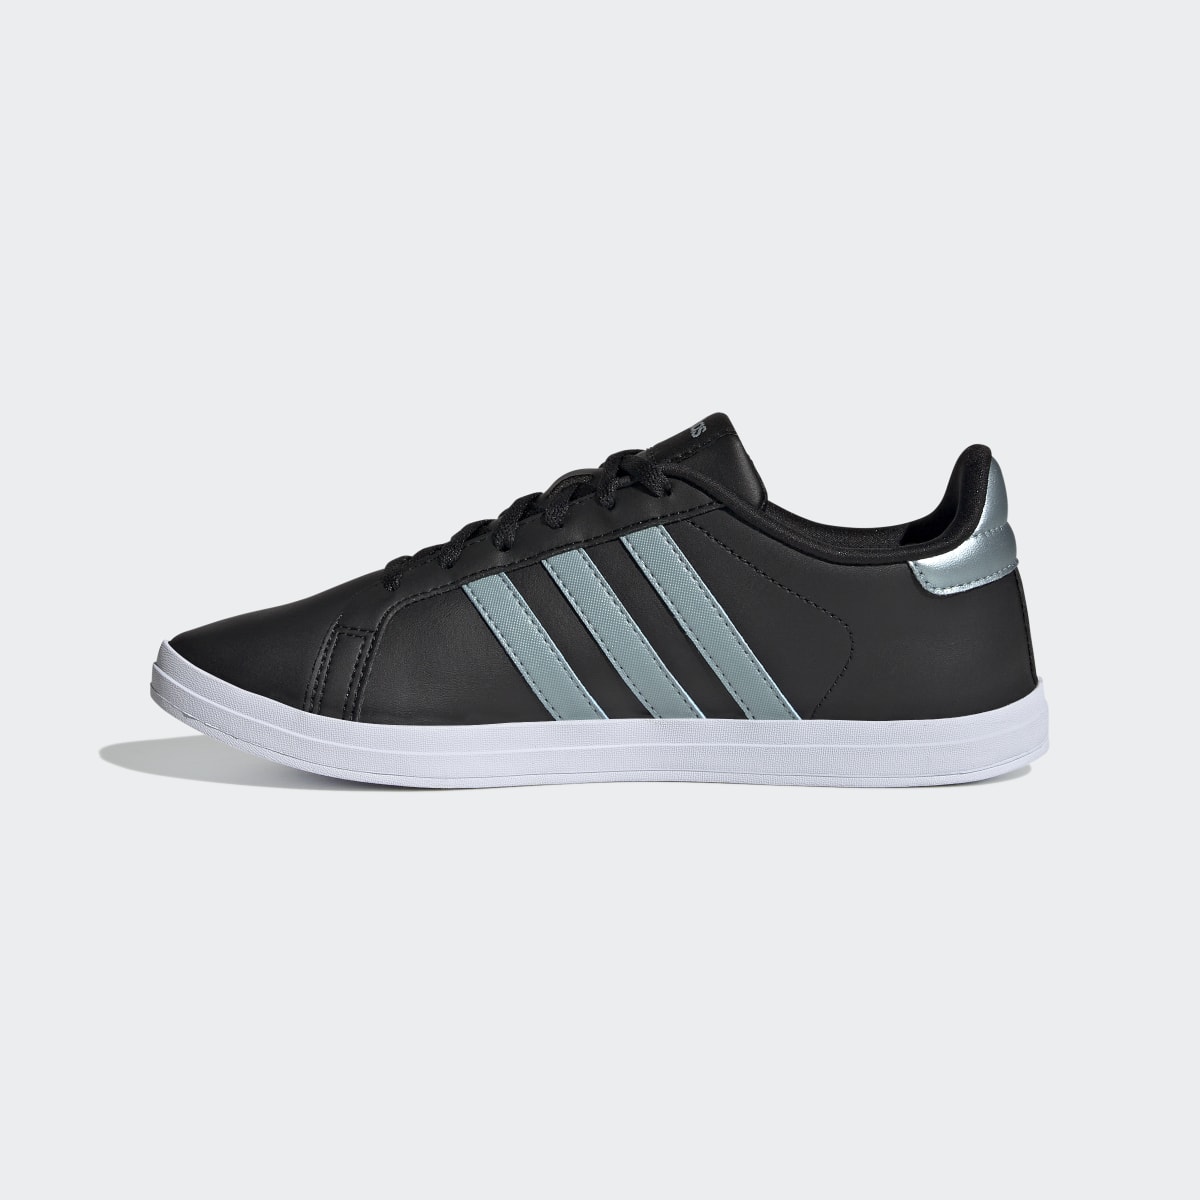 Adidas Courtpoint Shoes. 7